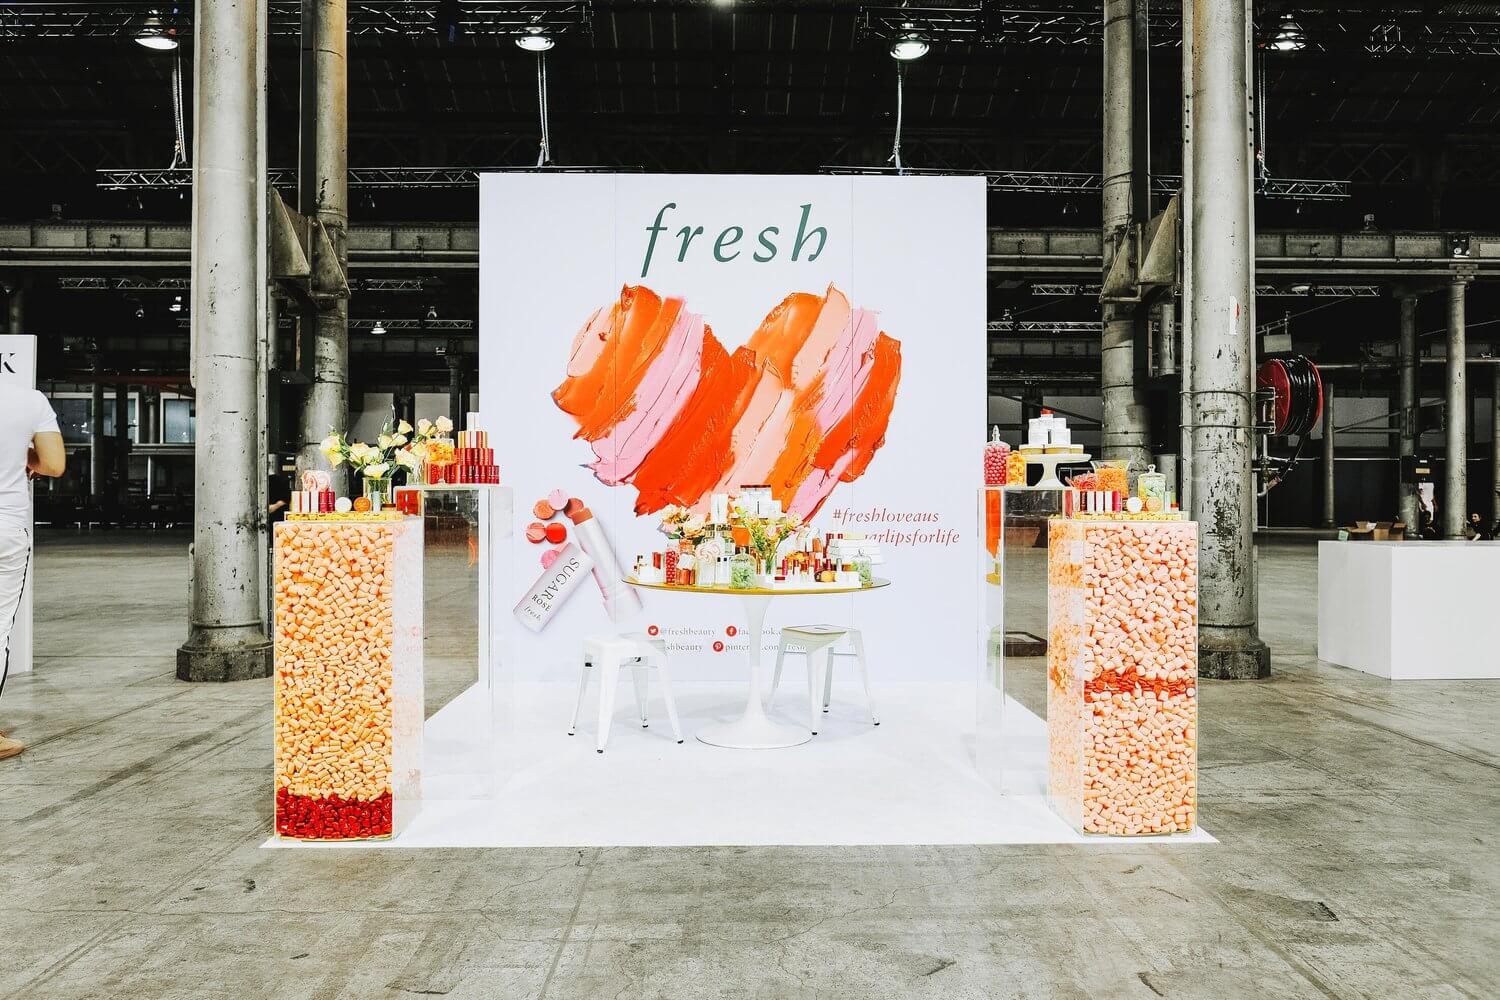 A highly saturated image of Sephora's "Fresh" stand with a few chairs for people to try their new lipstick.